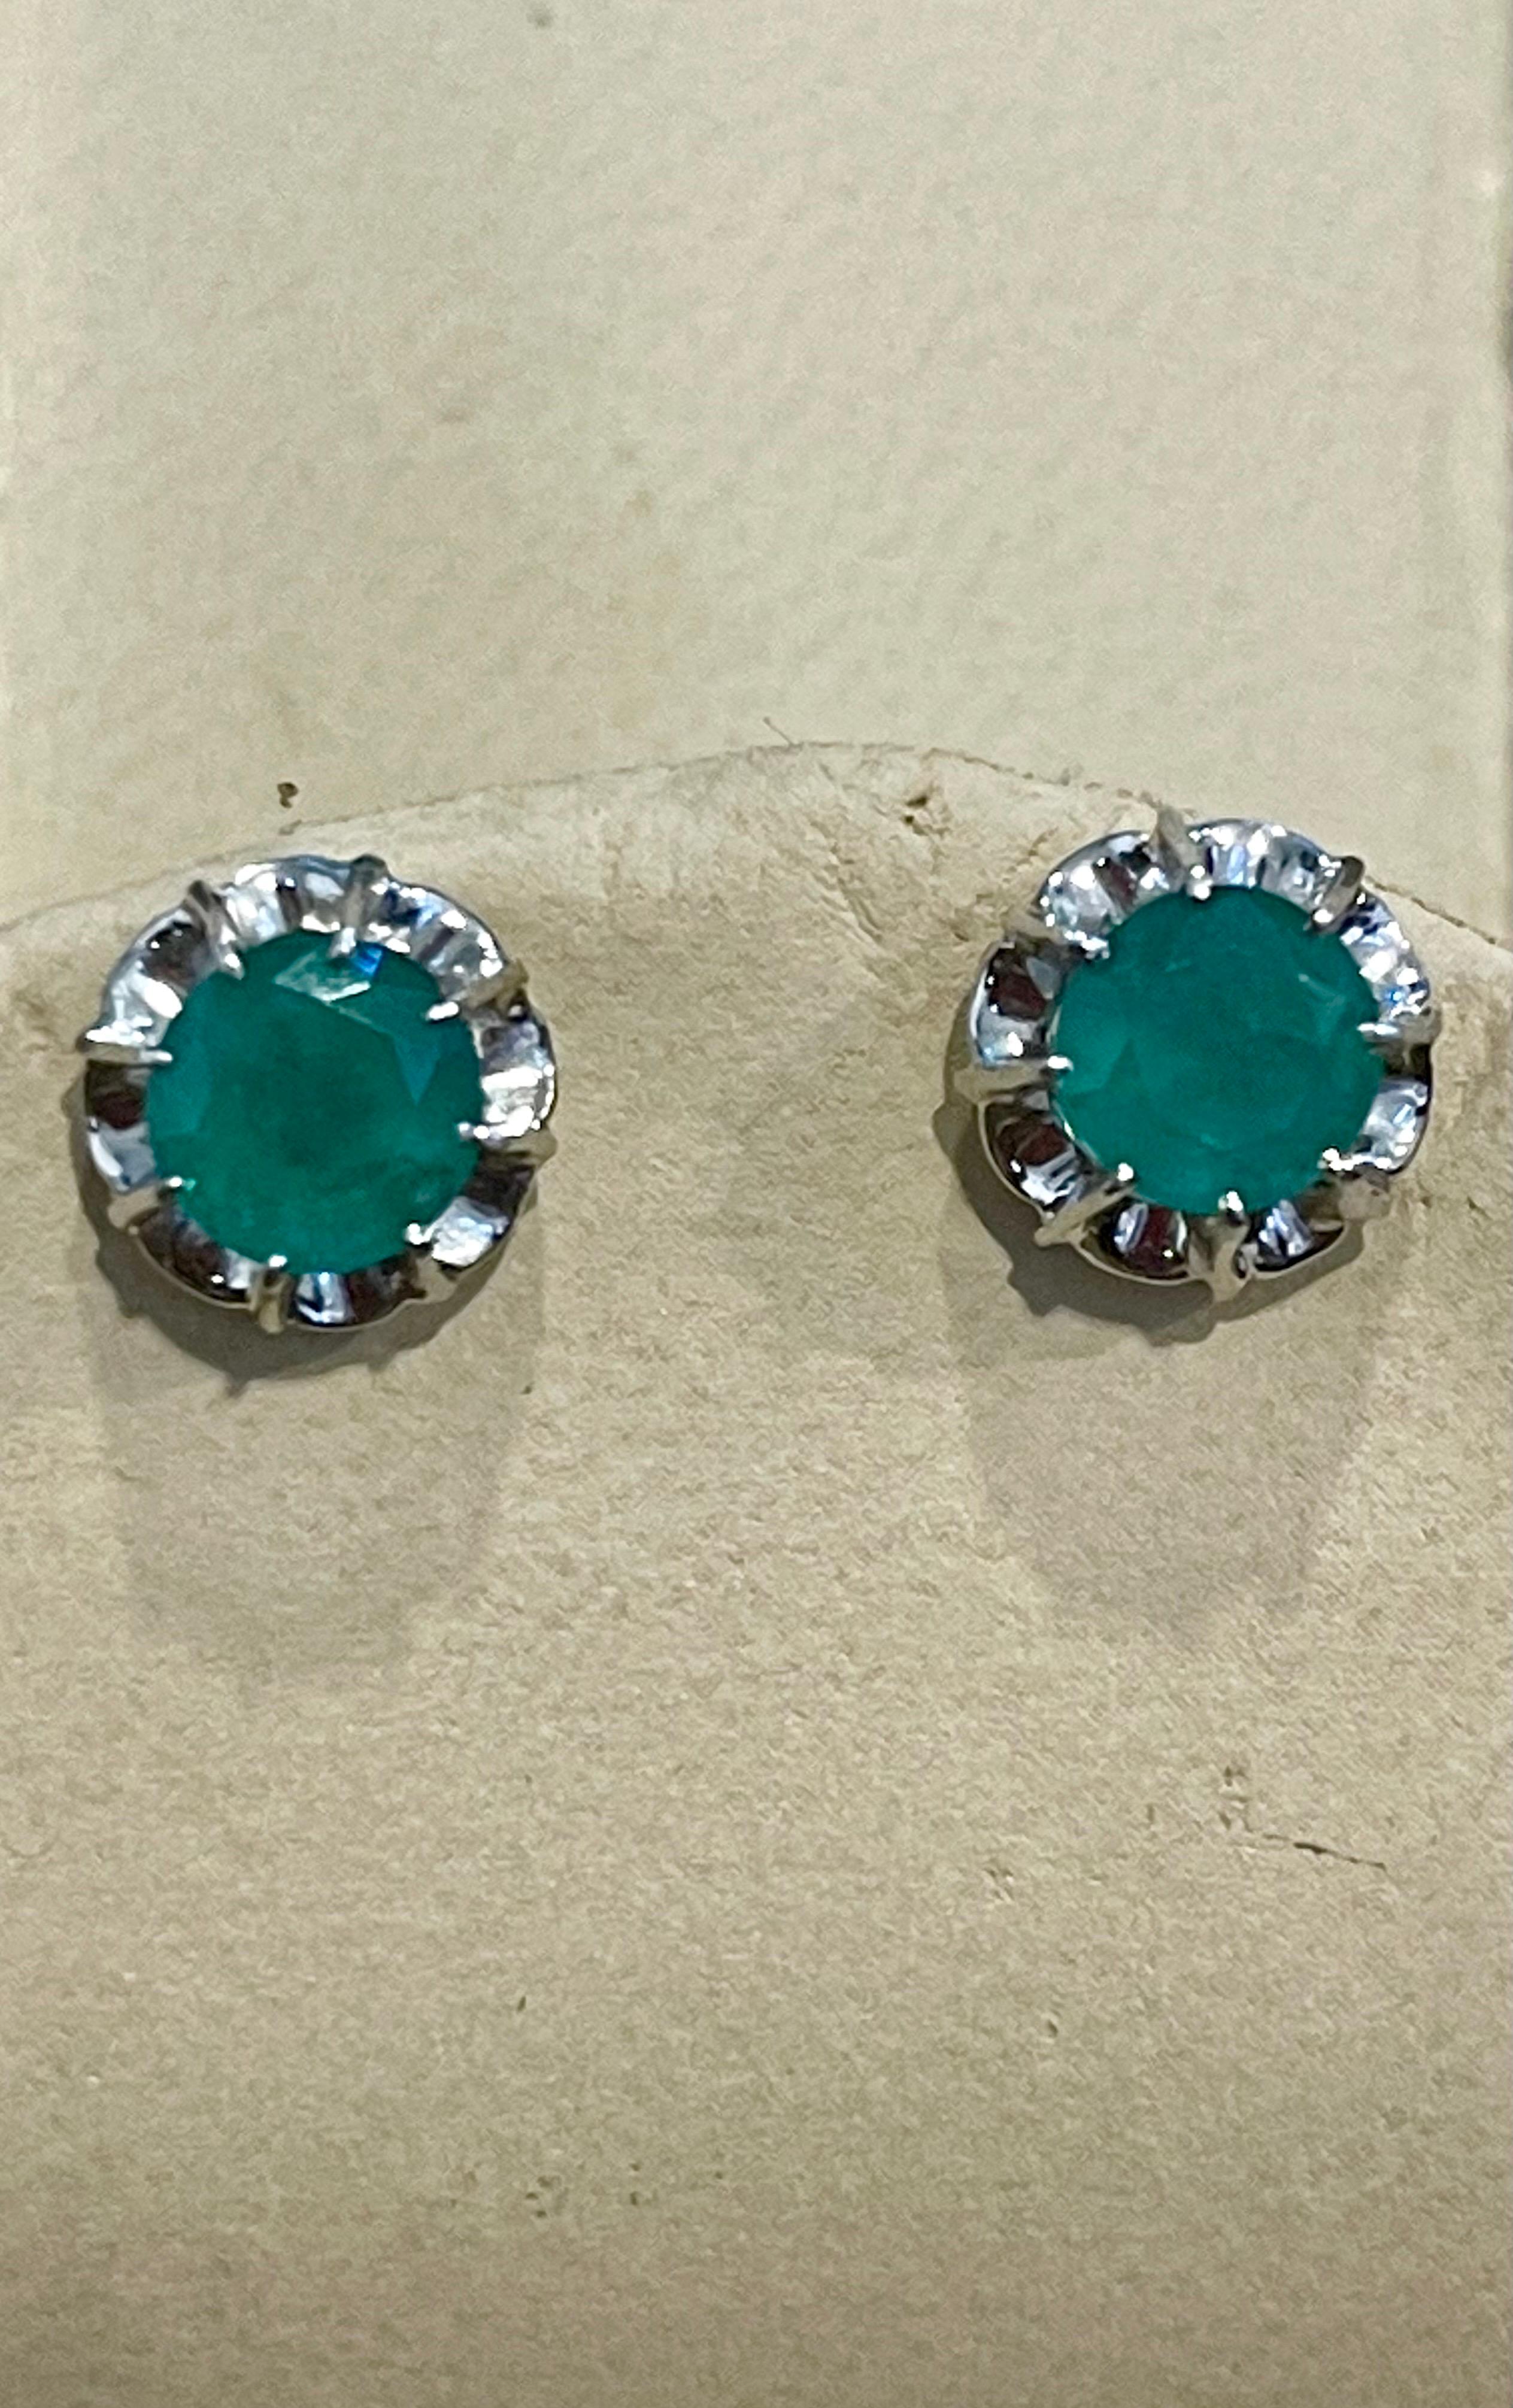 2 Carat Round Natural Emerald Stud Post Earrings 18 Karat White Gold In Excellent Condition For Sale In New York, NY